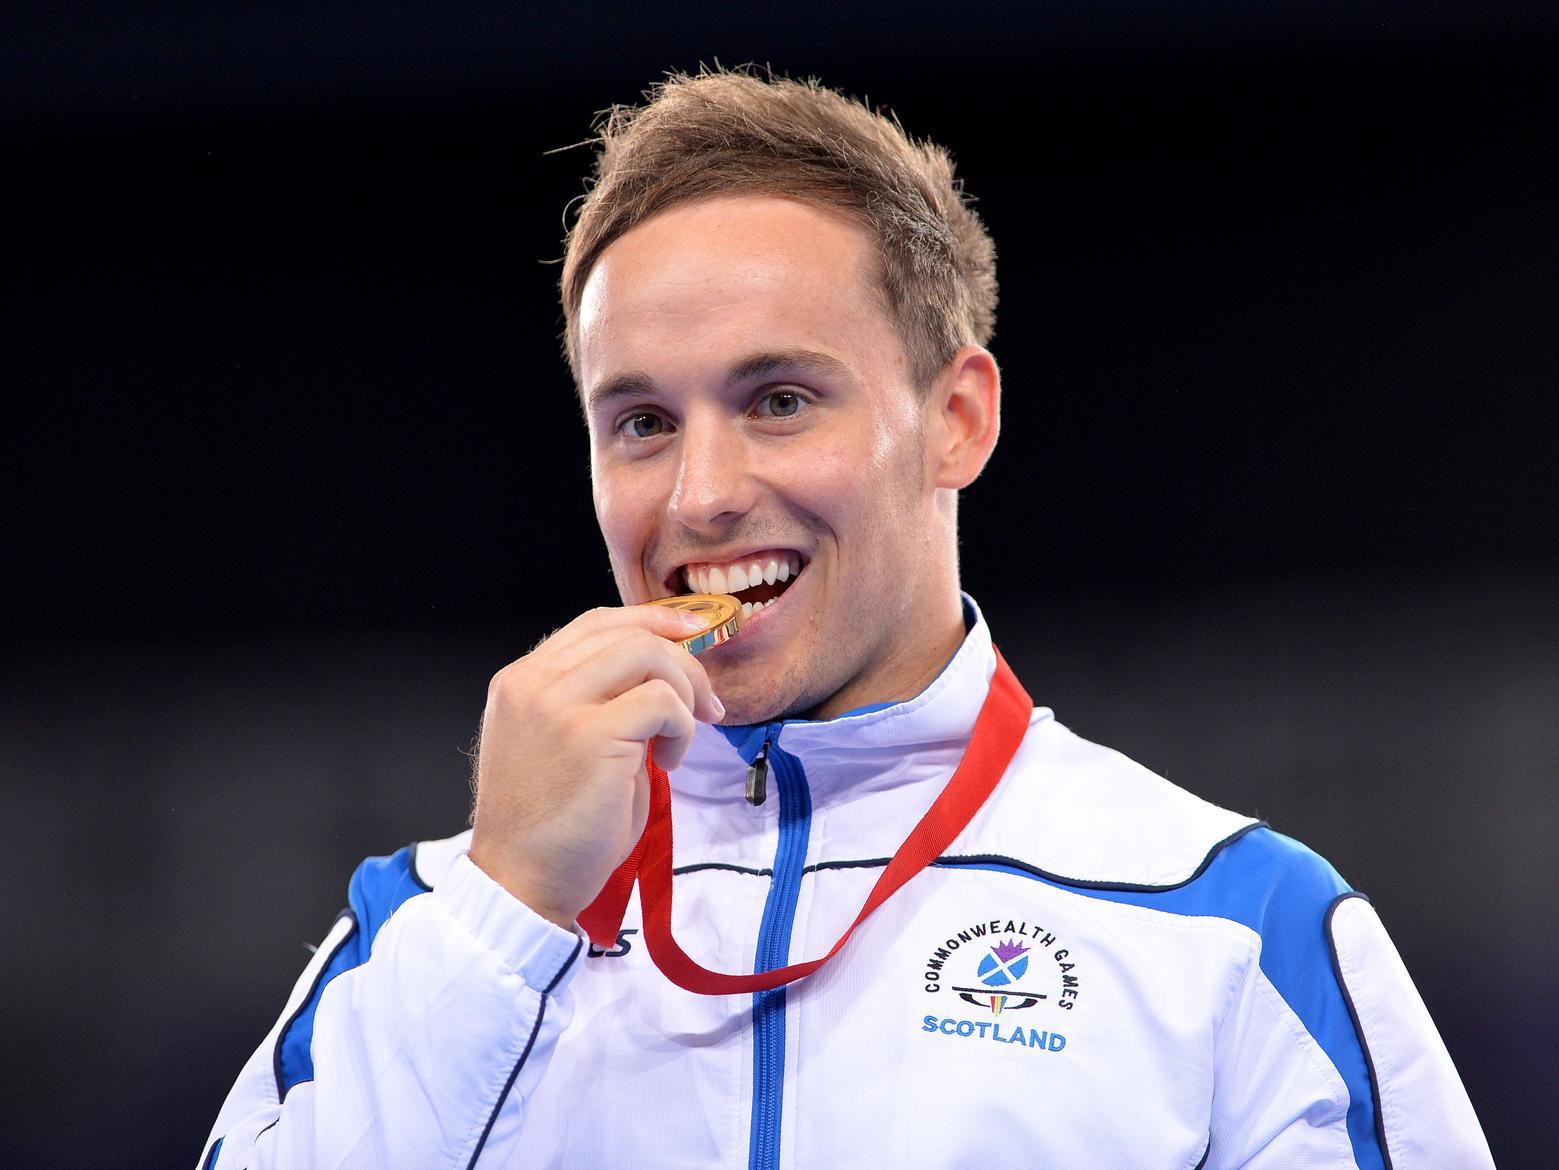 Olympic gymnast Dan, from Great Oakley, is one of the town's most decorated sportsmen, winning three gold medals at European and Commonwealth games on the pommel horse. Dan went to Kingswood School and retired from competitive gymnastics in 2017.